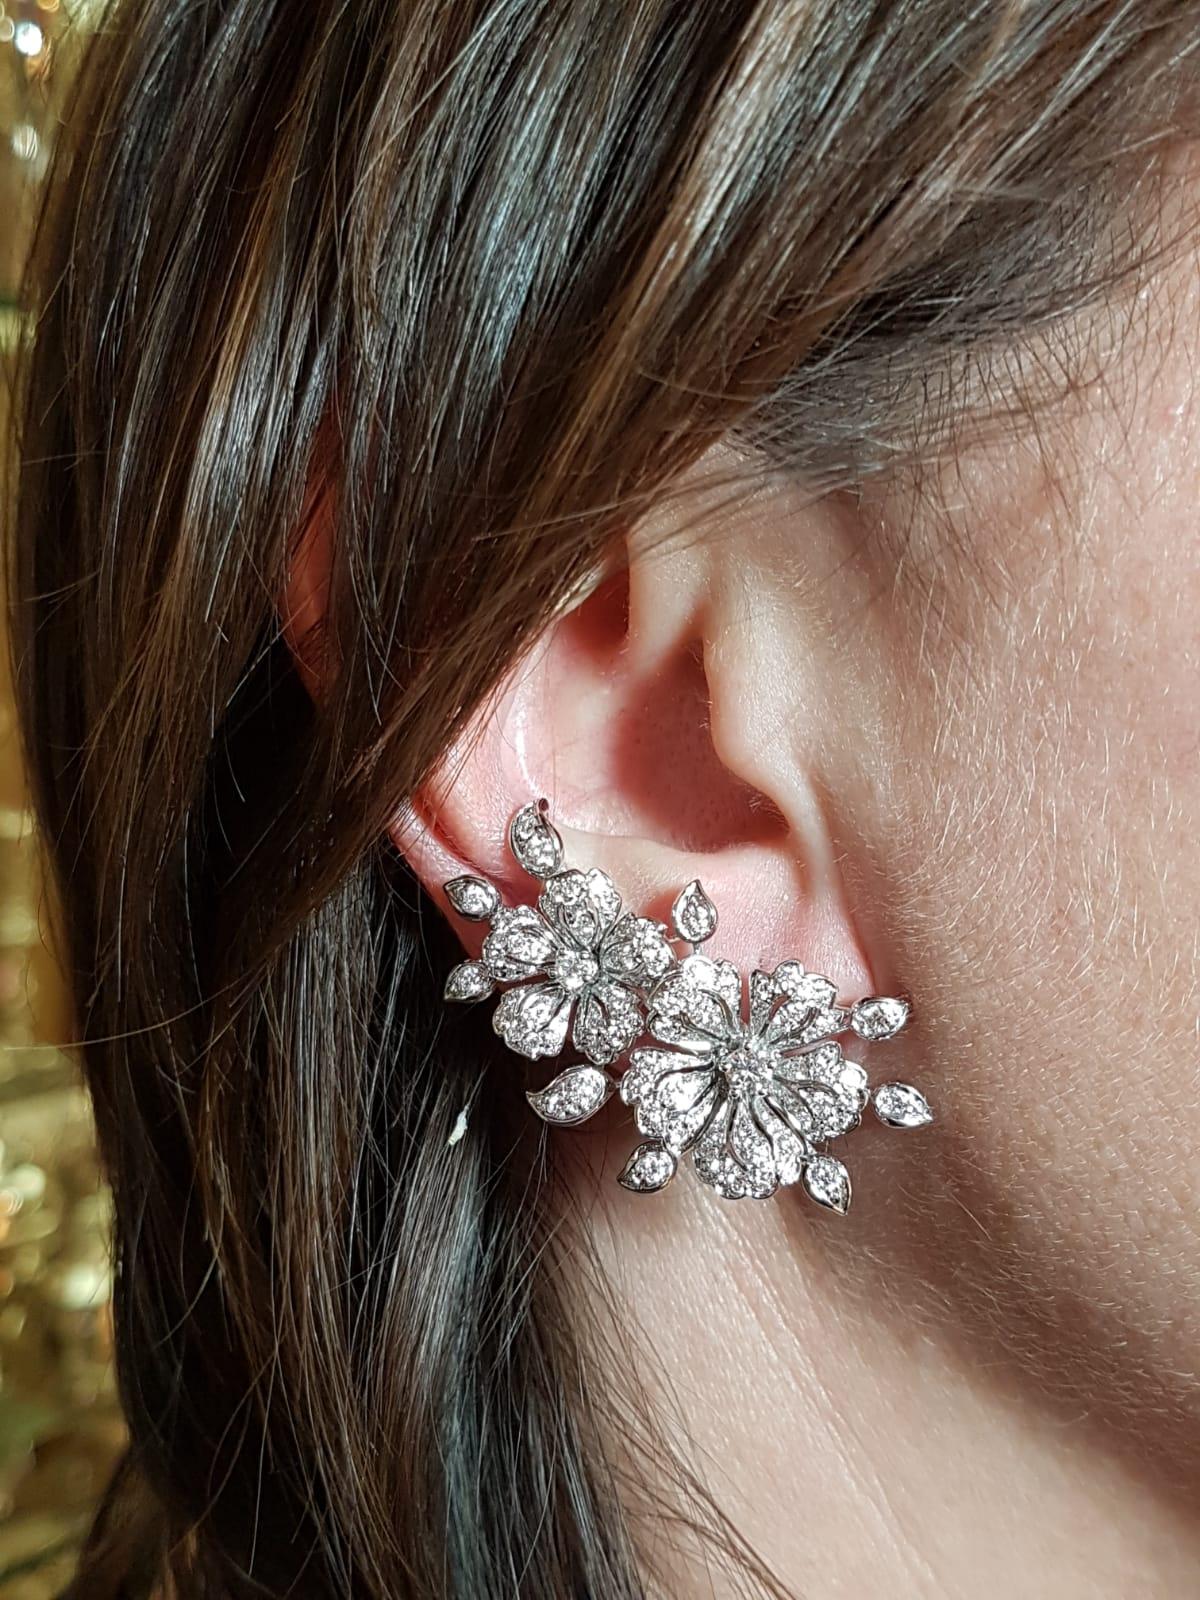 With spring on the way there's no better time to update your jewellery - and in keeping with the season, a flower stud earrings is ideal. Made from 18K White Gold (21,40gr) and diamonds (2,60ct) this earrings by Repossi are guarantee of refine